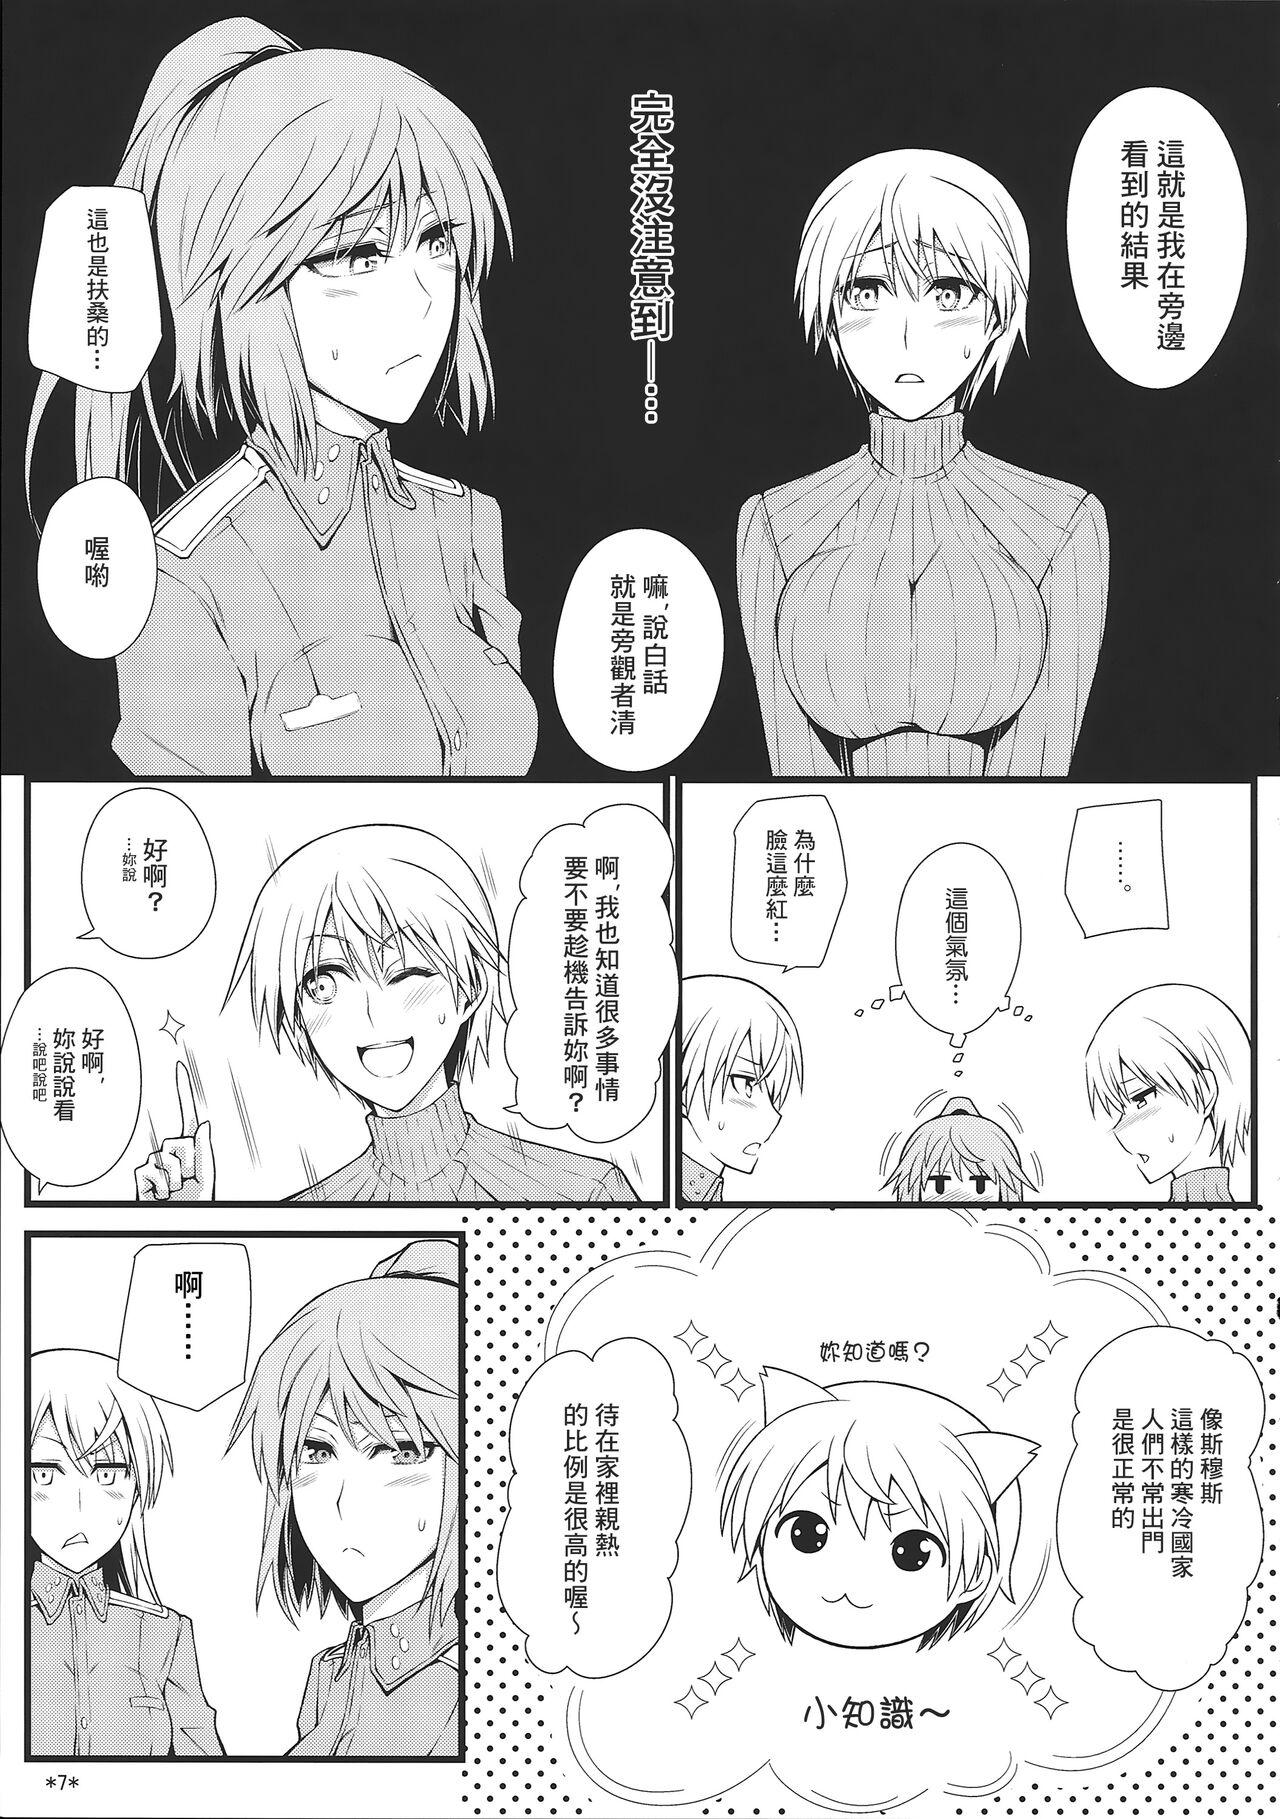 Camwhore KARLSLAND SYNDROME 3 - Strike witches Online - Page 9